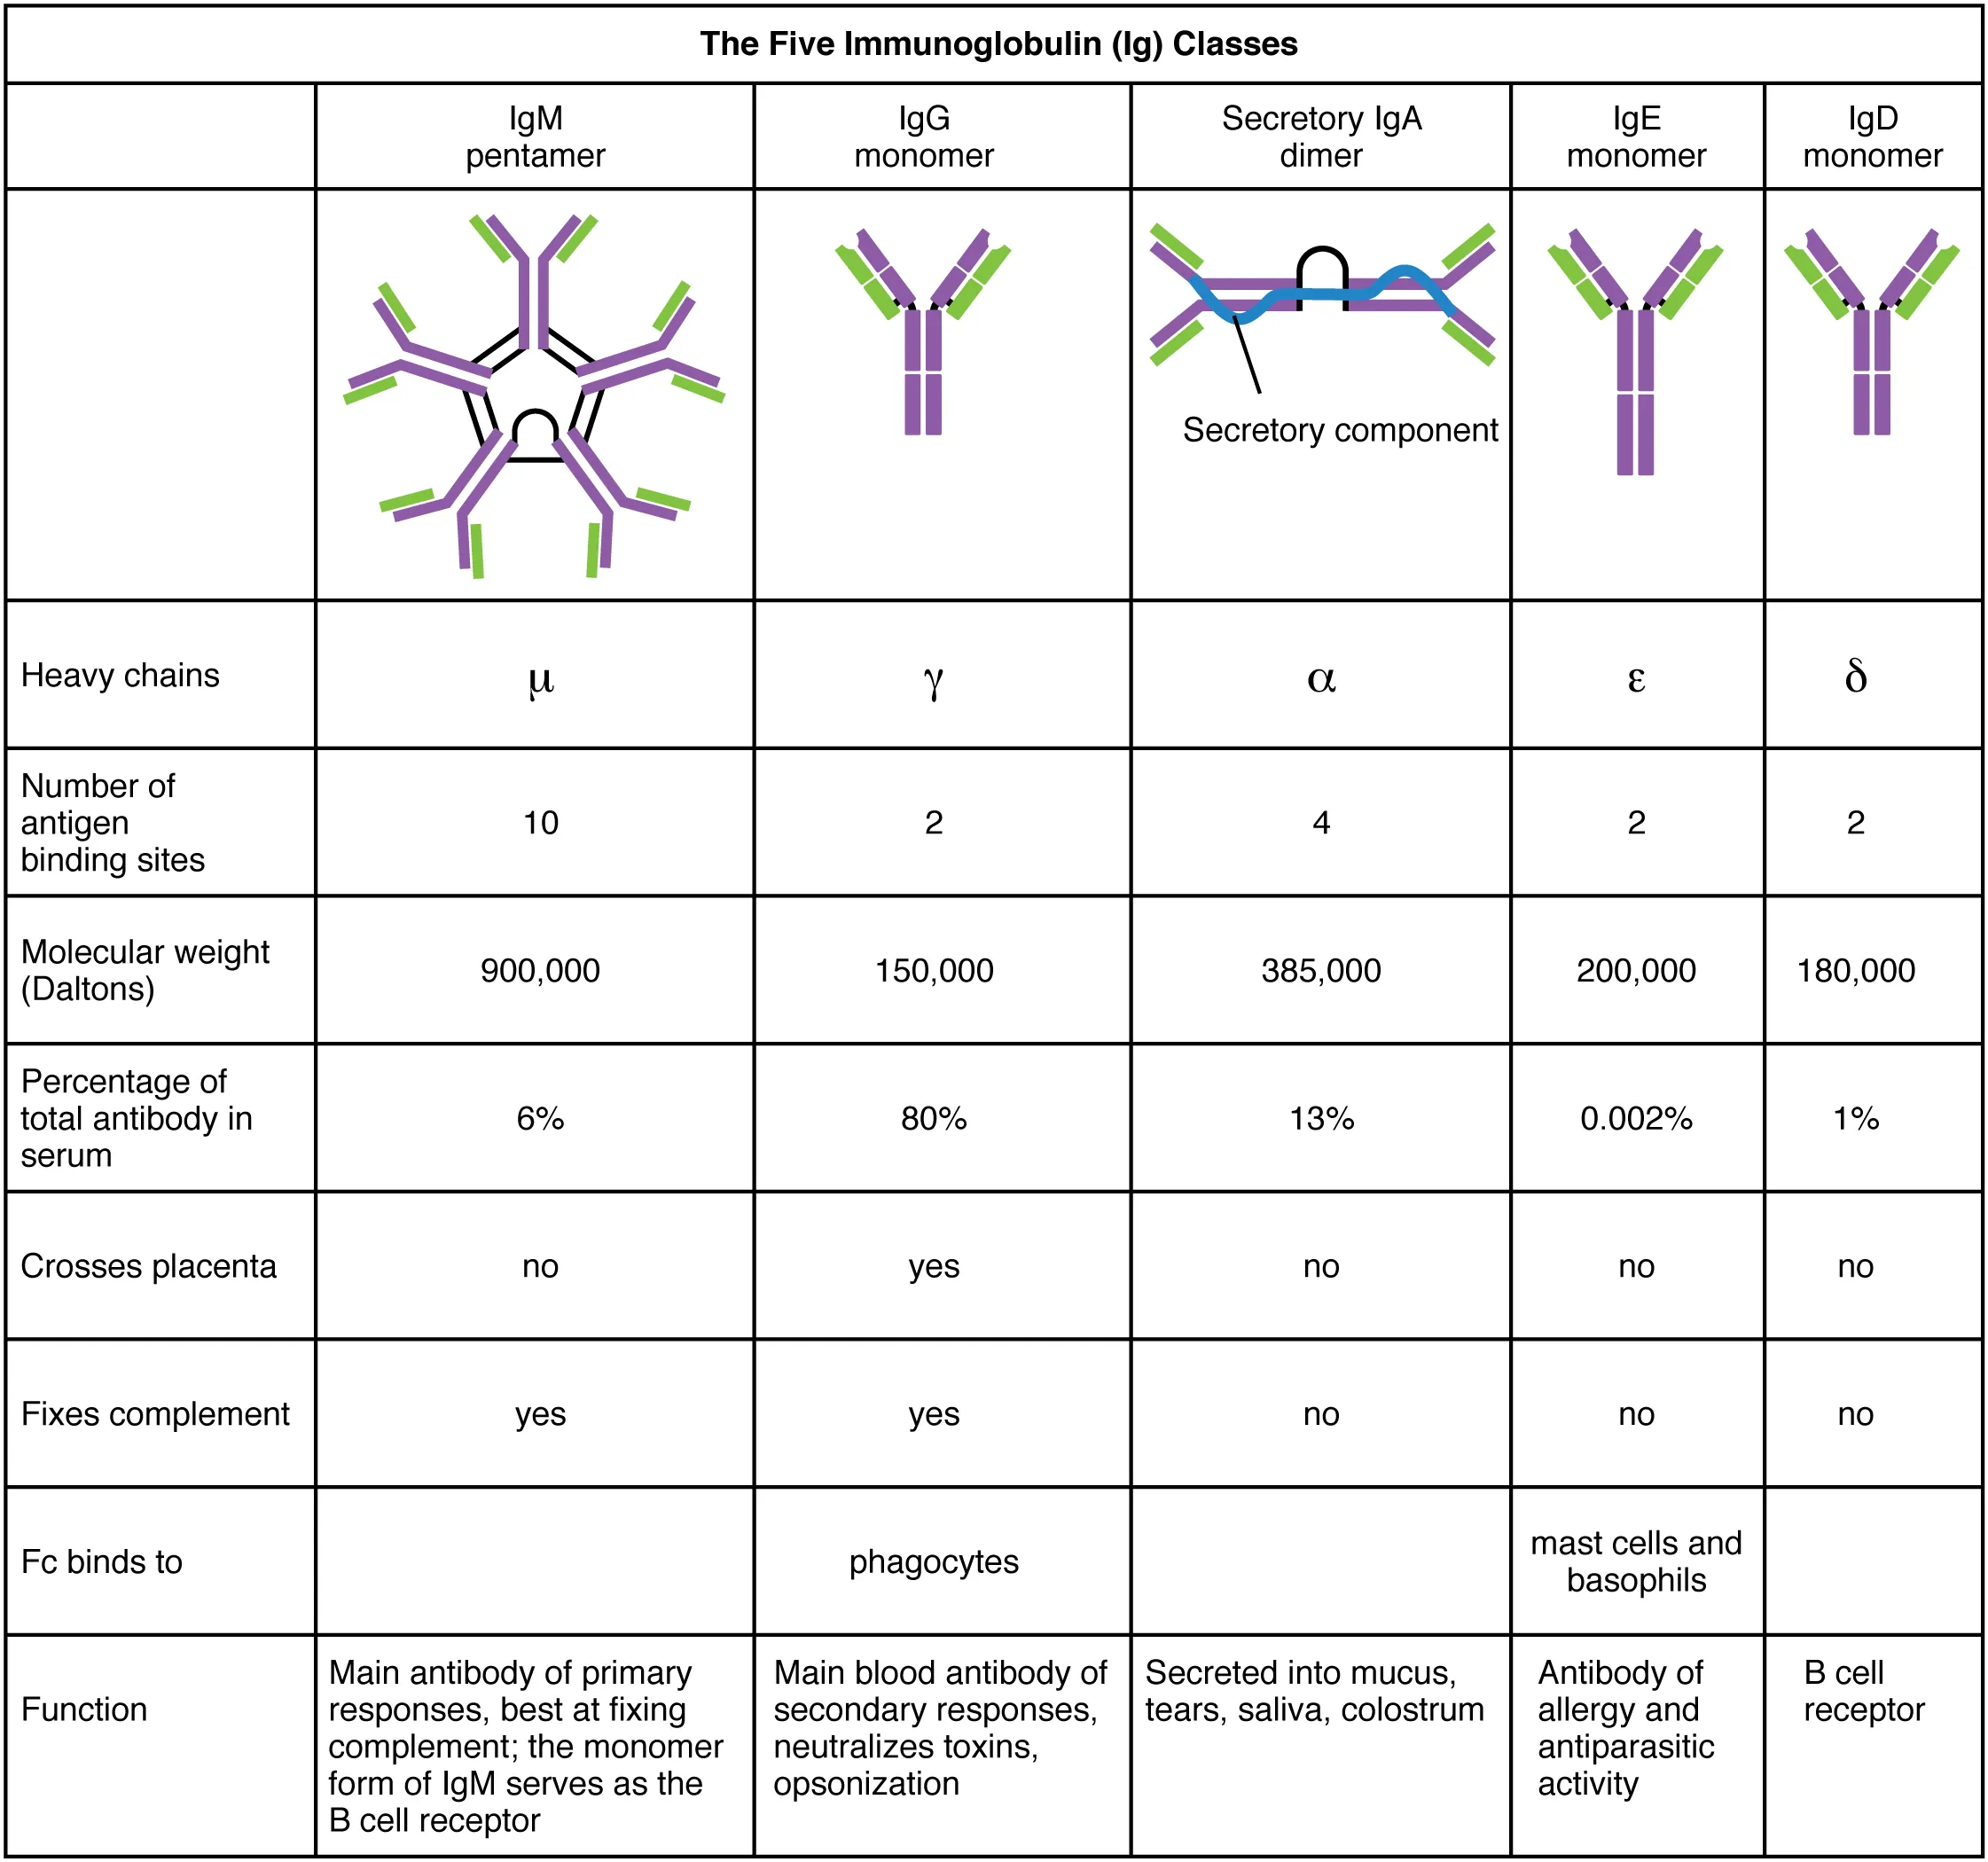 This table shows the five classes of the immunoglobulins. The table shows the molecular weight, number of antigen binding sites, and their function.